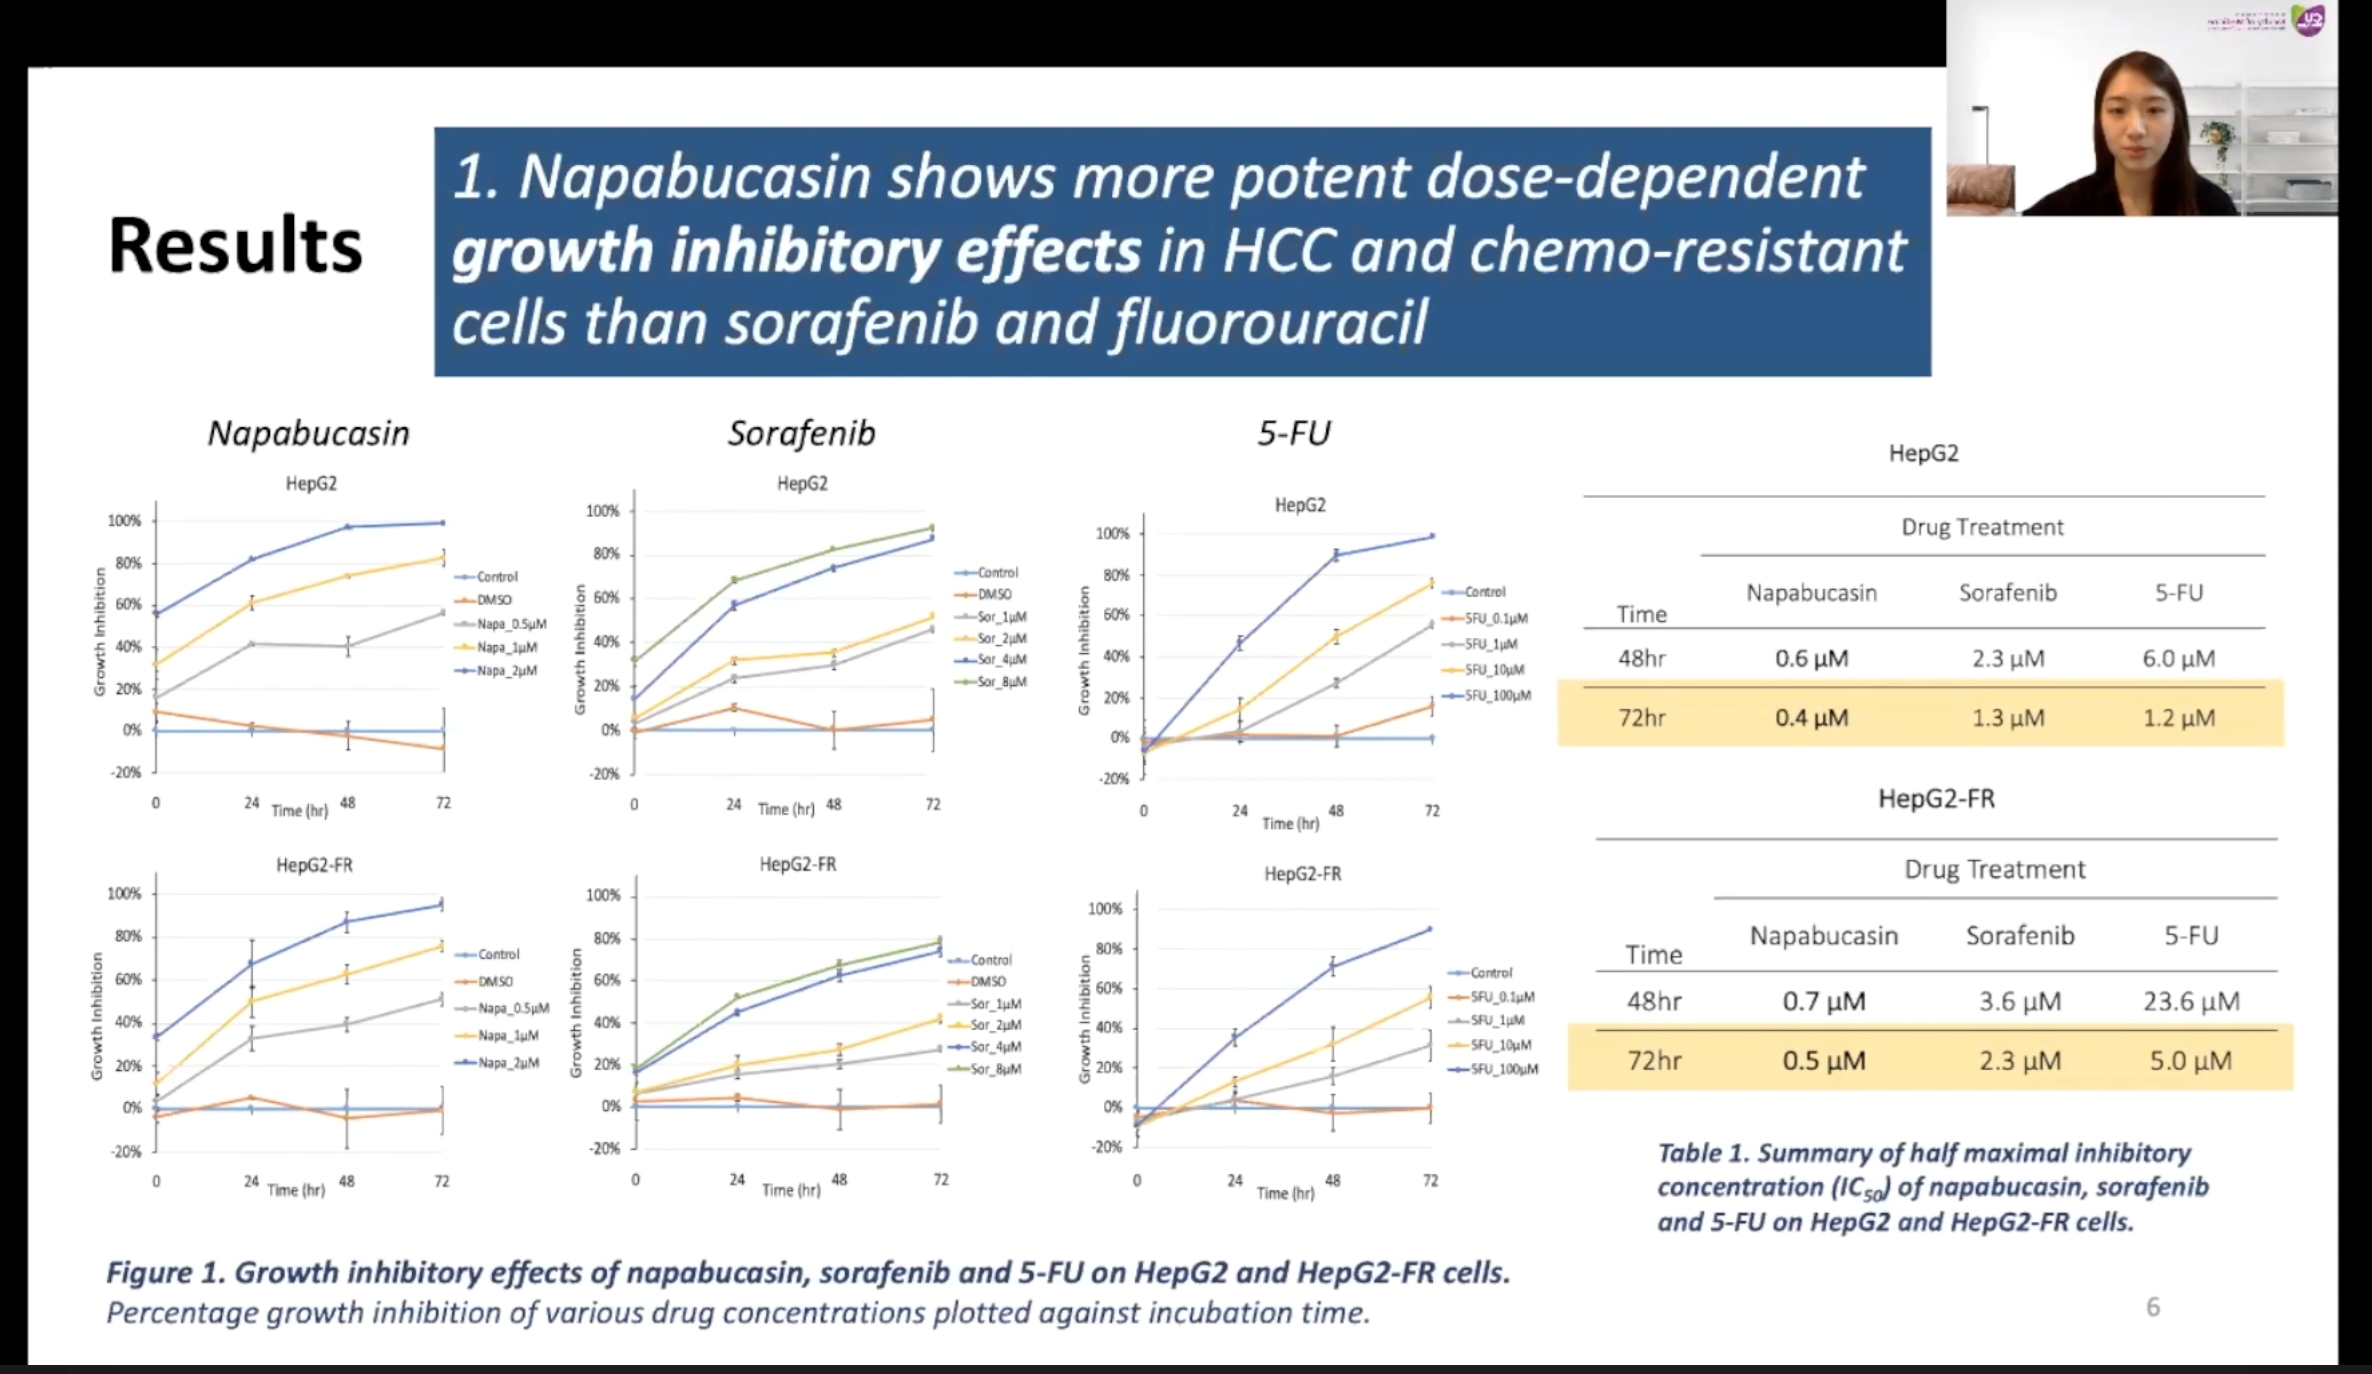 Comparison between napabucasin, sorafenib and fluorouracil on potent dose-dependent growth inhibitory effects in HCC and chemo-resistant cells